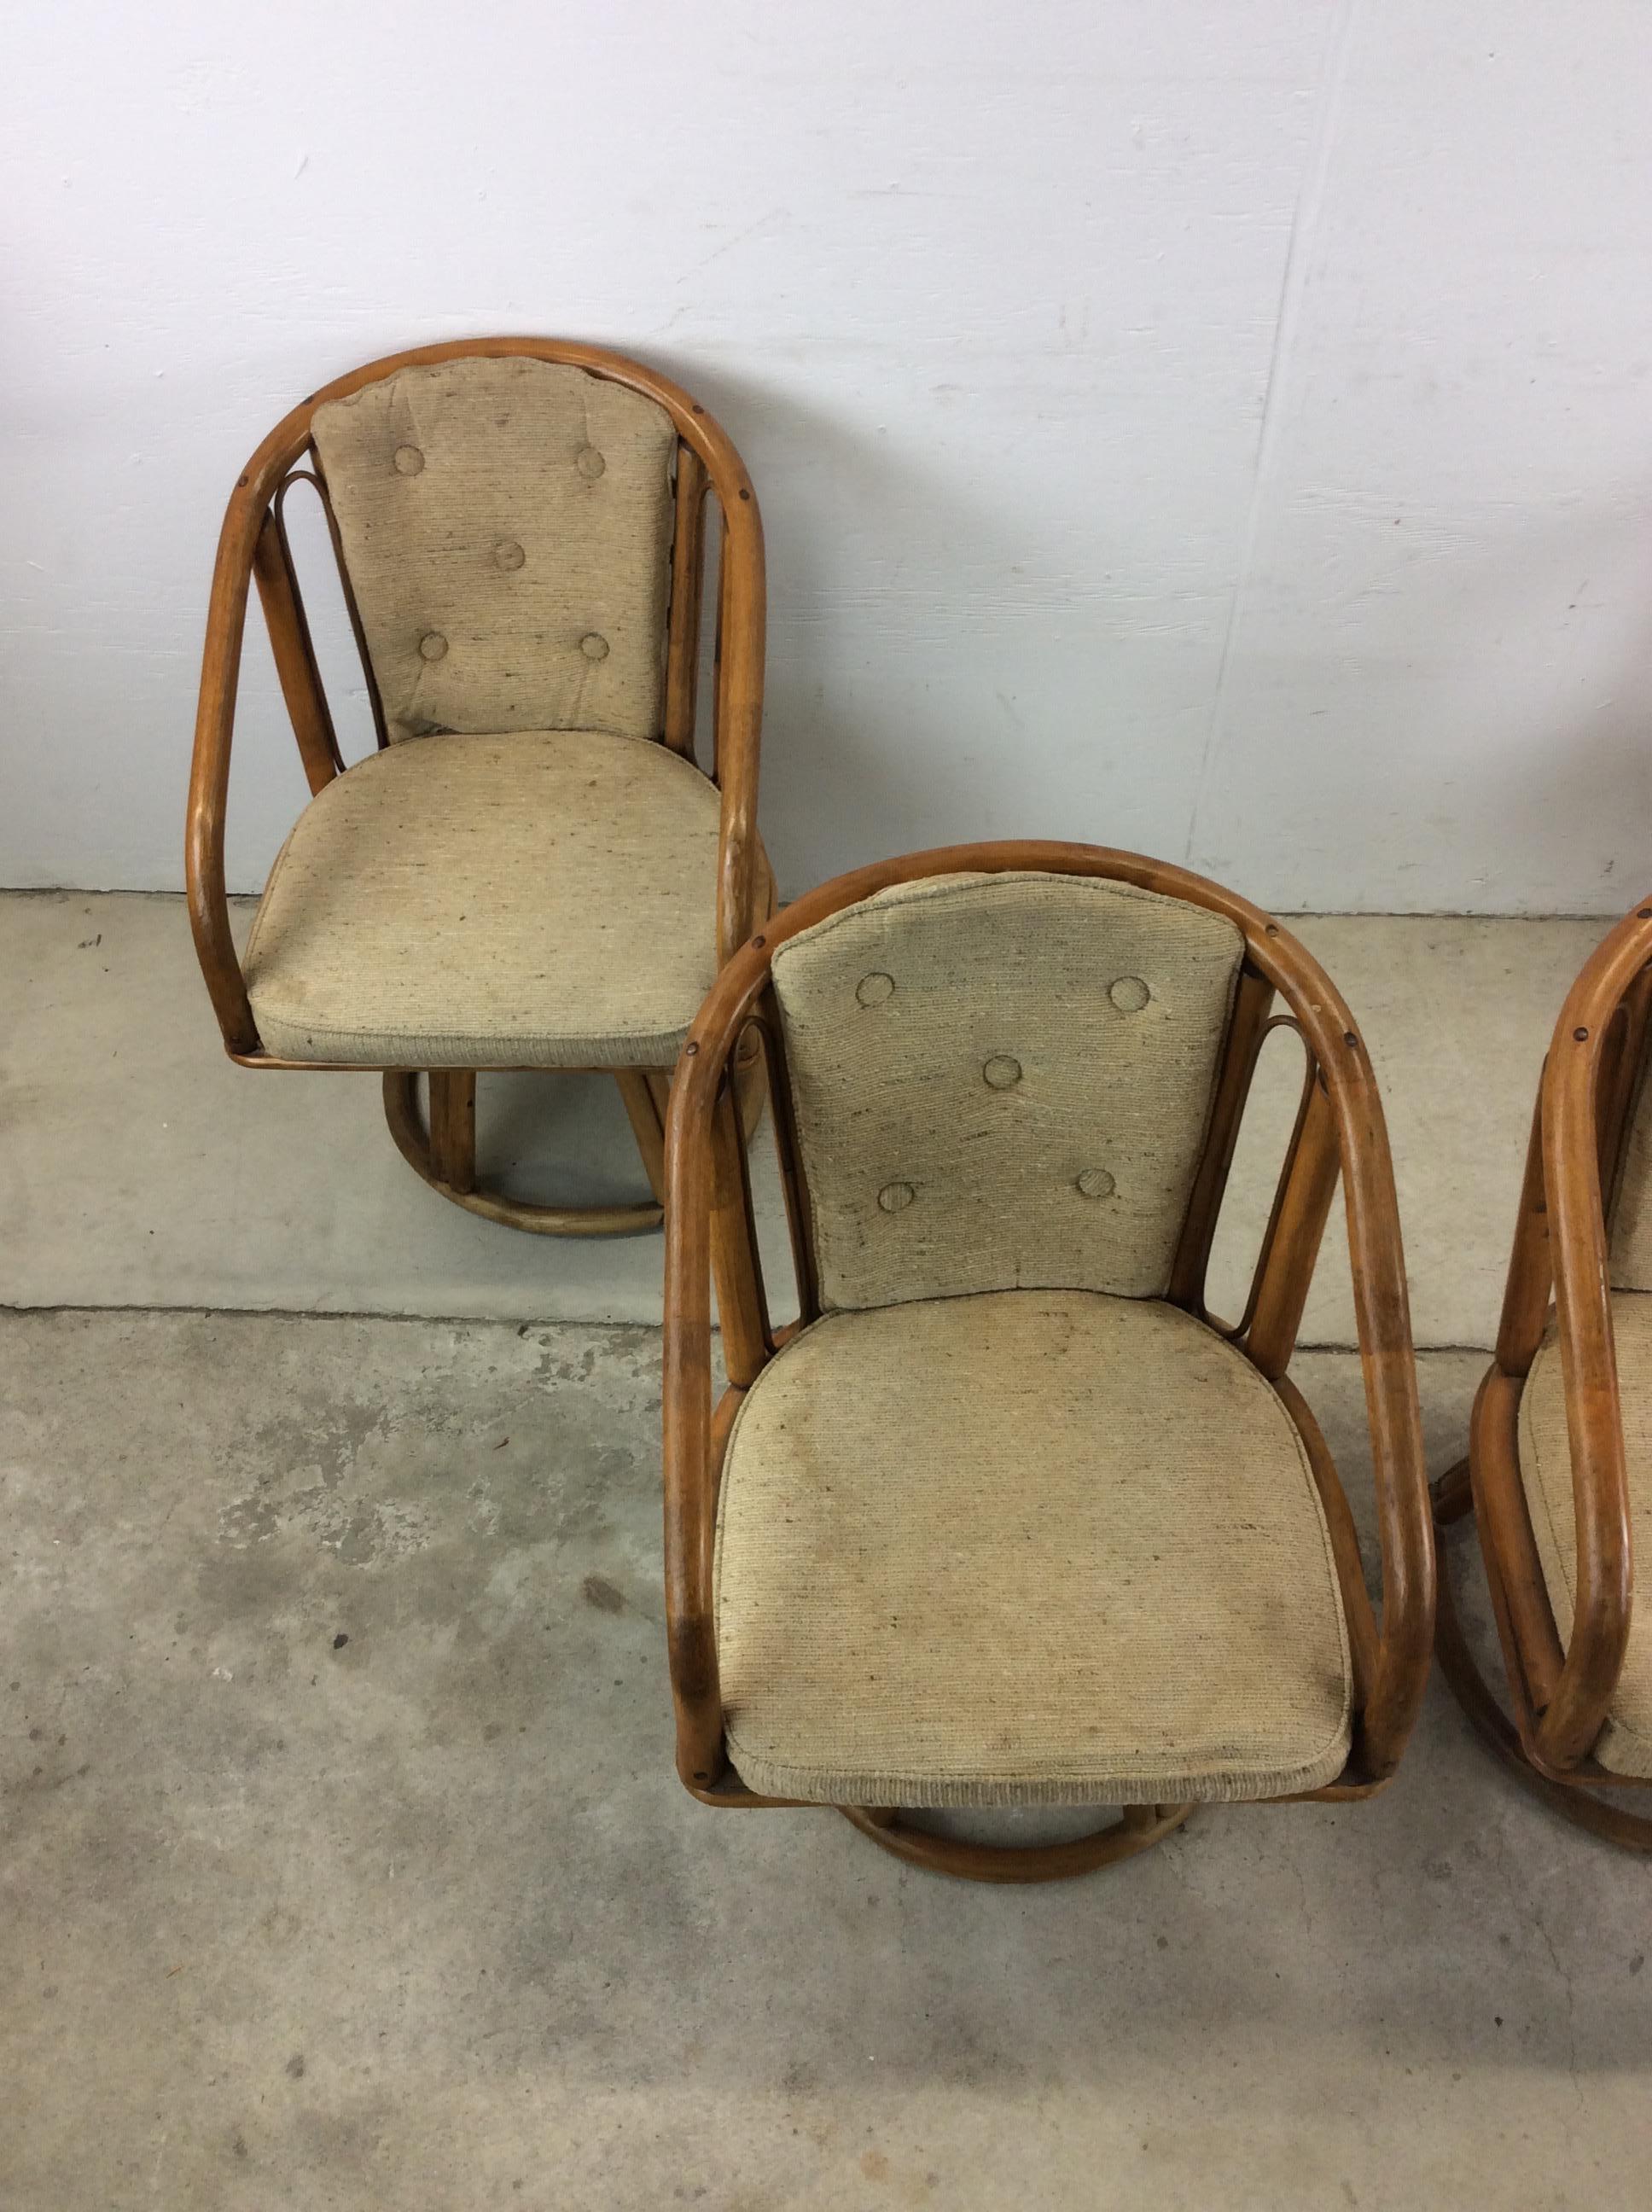 This vintage set of four kitchen chairs features solid rattan construction, original finish, vintage upholstery including tufted seat back, and unique swivel pedestal base.

Matching glass top table with rattan base available separately.